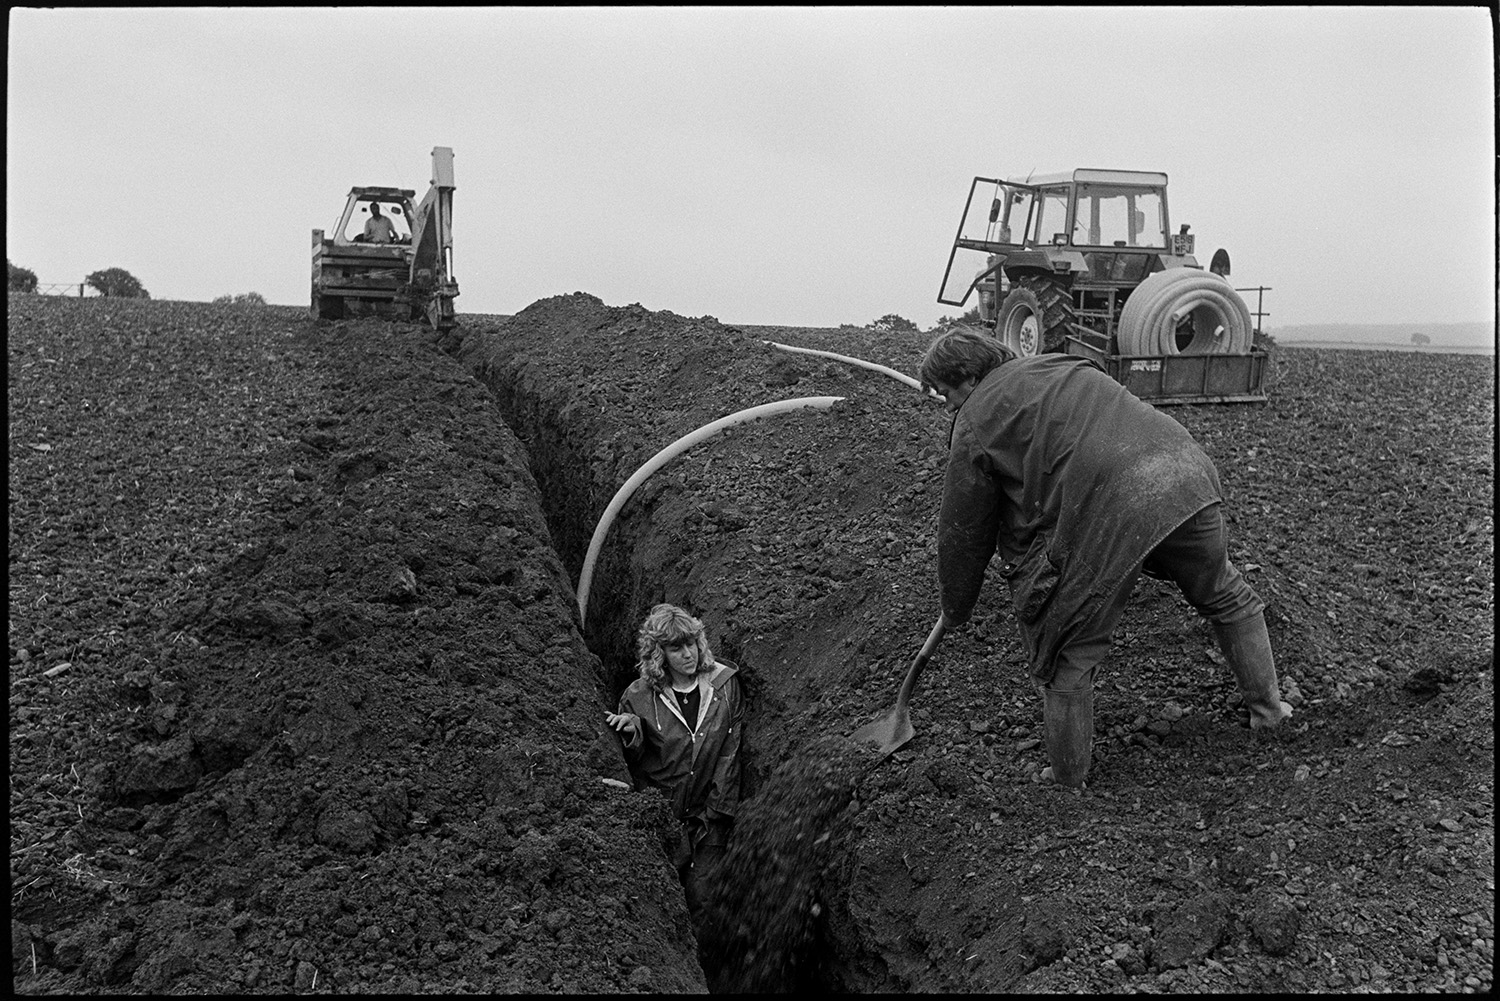 Farmer and daughter, woman, laying drainage pipe in ploughed field, tractor, JCB. 
[Rob Millman and his daughter laying a drainage pipe in a ploughed field near Leigh Cross, Chulmleigh. His daughter is stood in the trench with the pipe while Rob Millman shovels earth in to cover the pipe. A JCB can be seen in the background digging a trench for more pipework. A tractor with a link box containing another roll of drainage pipe in also visible.]